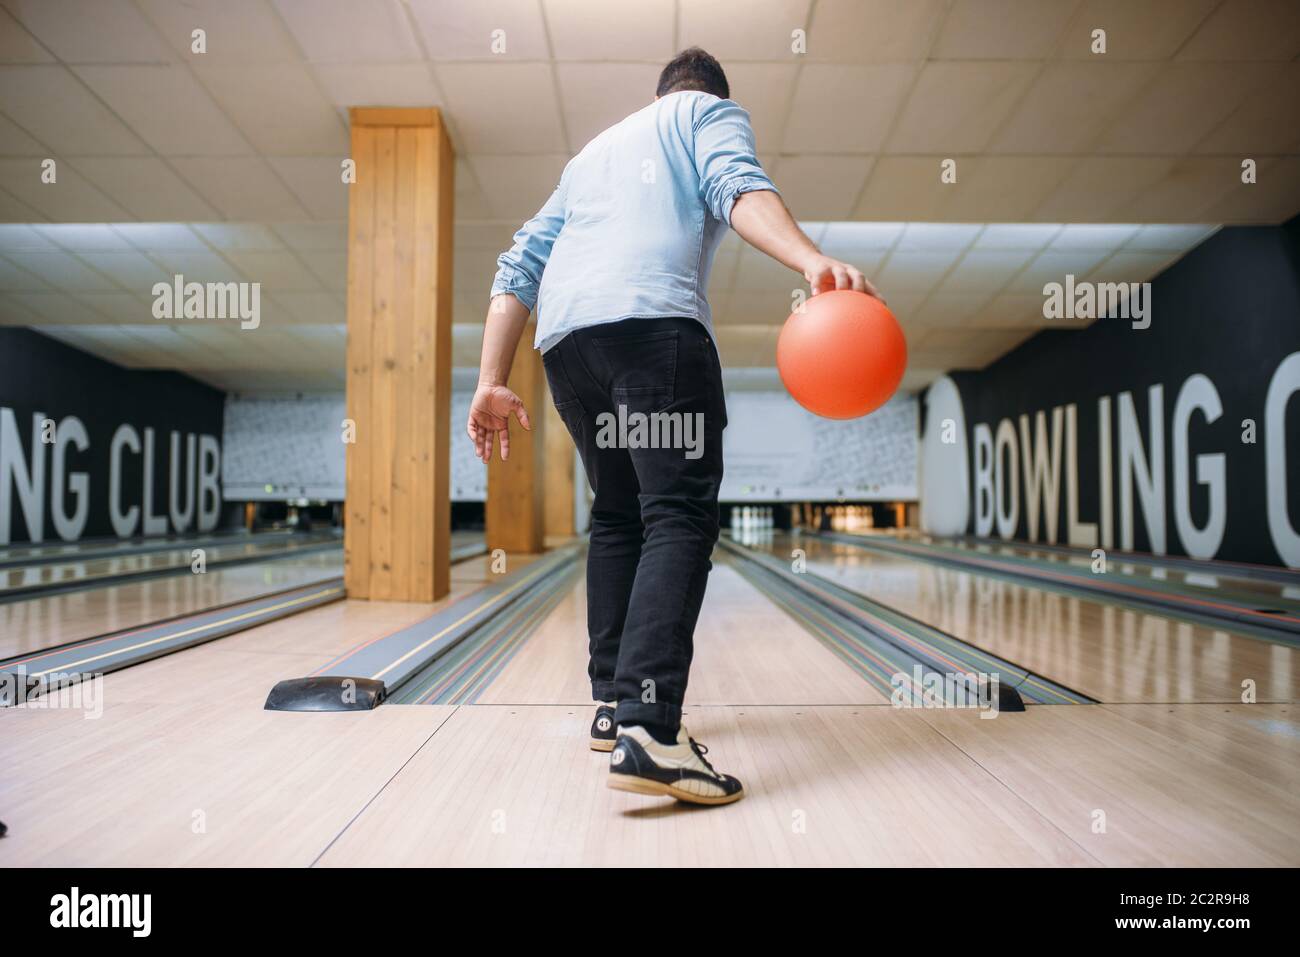 Male bowler standing on lane and poses with ball in hands, back view. Bowling alley player prepares to throw strike shot in club, active leisure Stock Photo